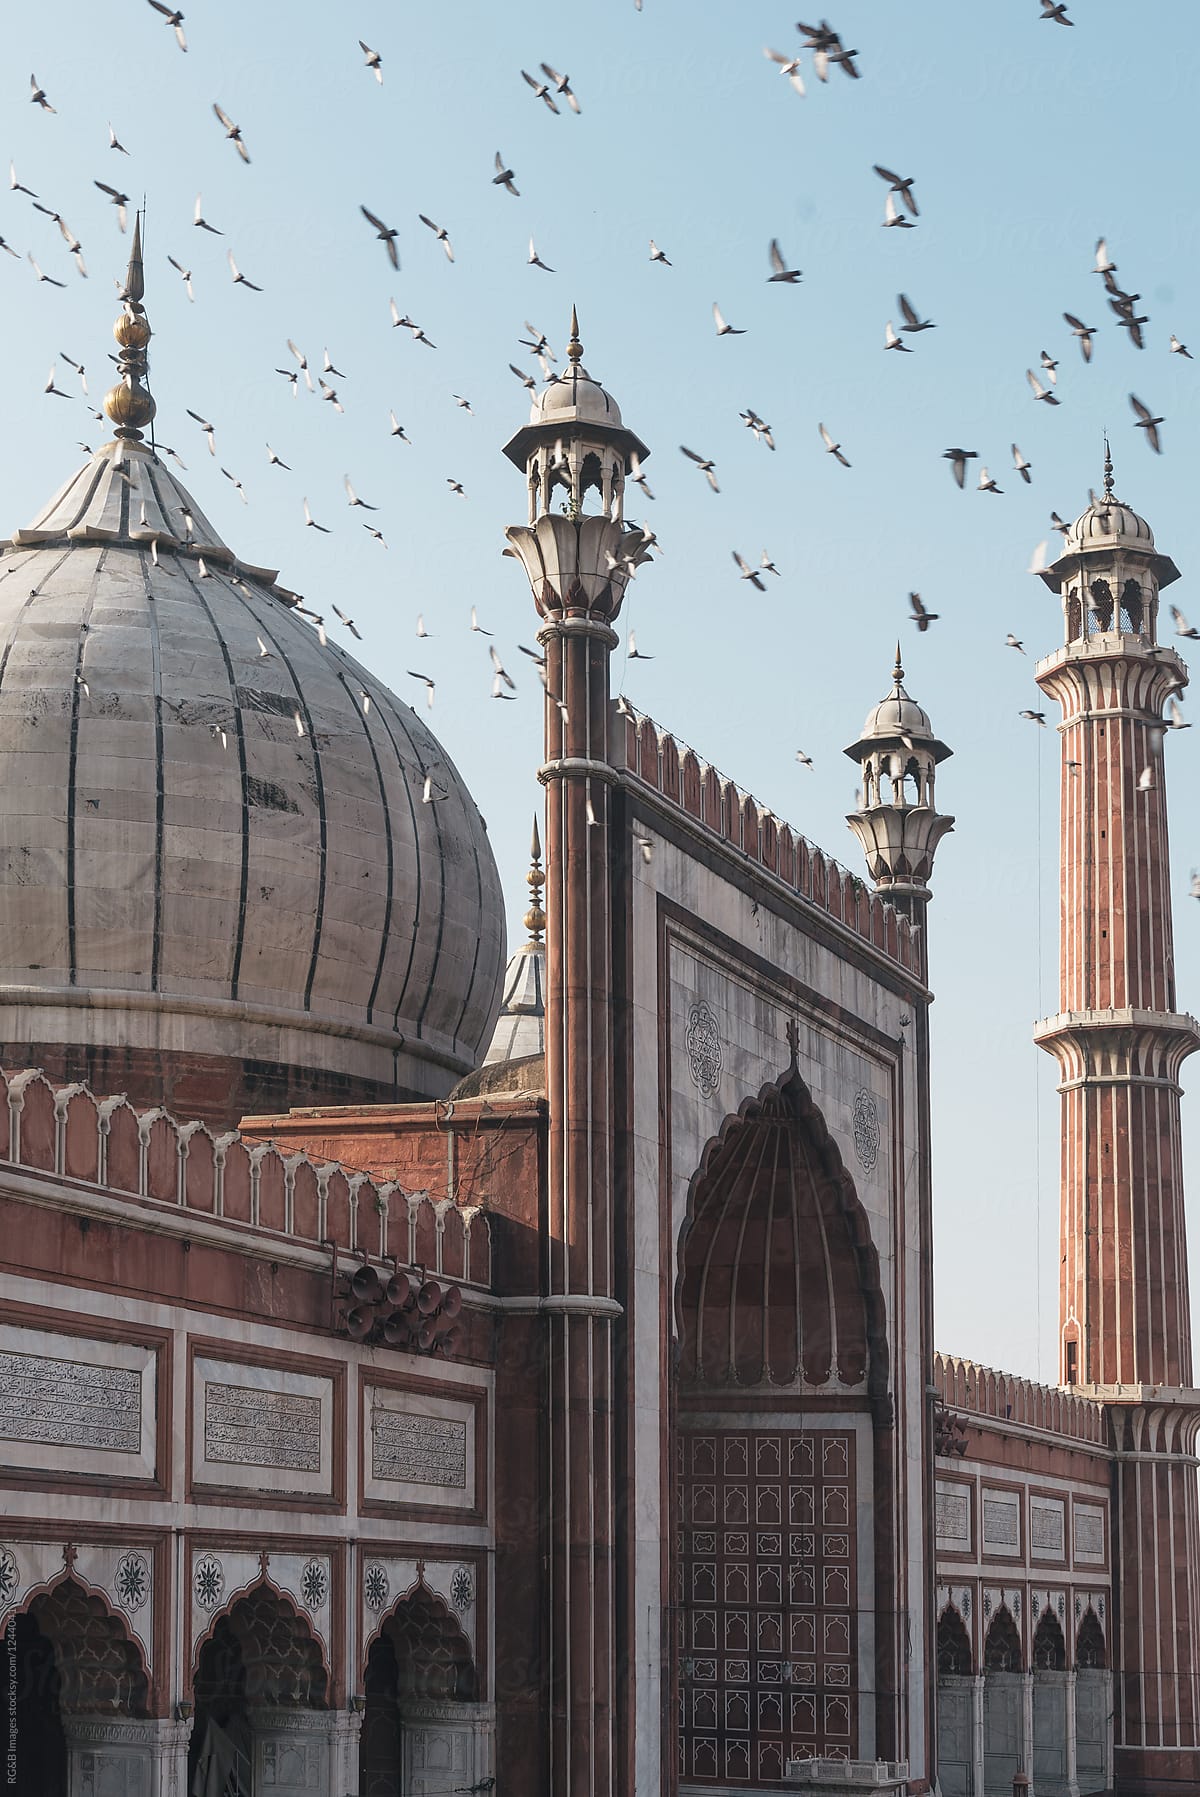 Flock of piegeons flying above ancient Jama Masjid mosque in India by Ibex.media, Building